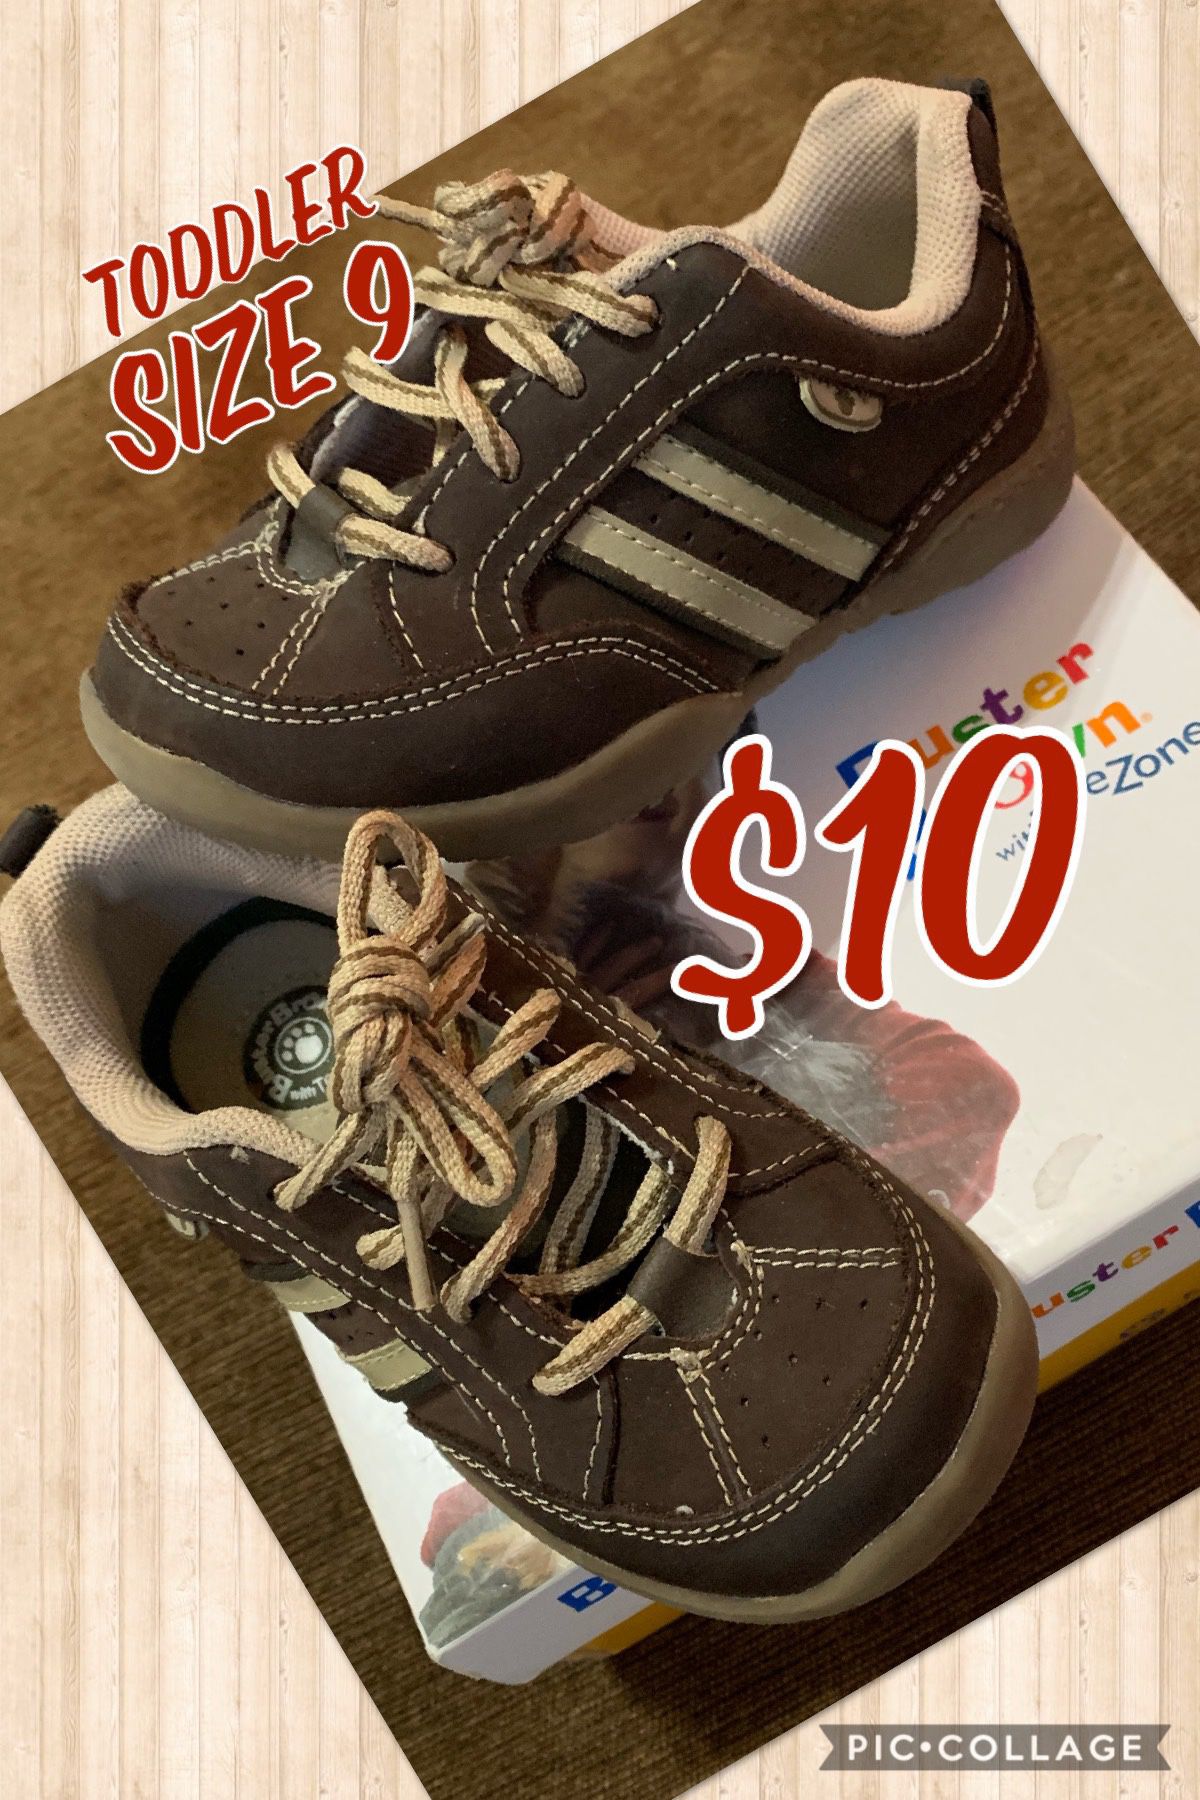 Toddler Shoes - Size 9 - $10